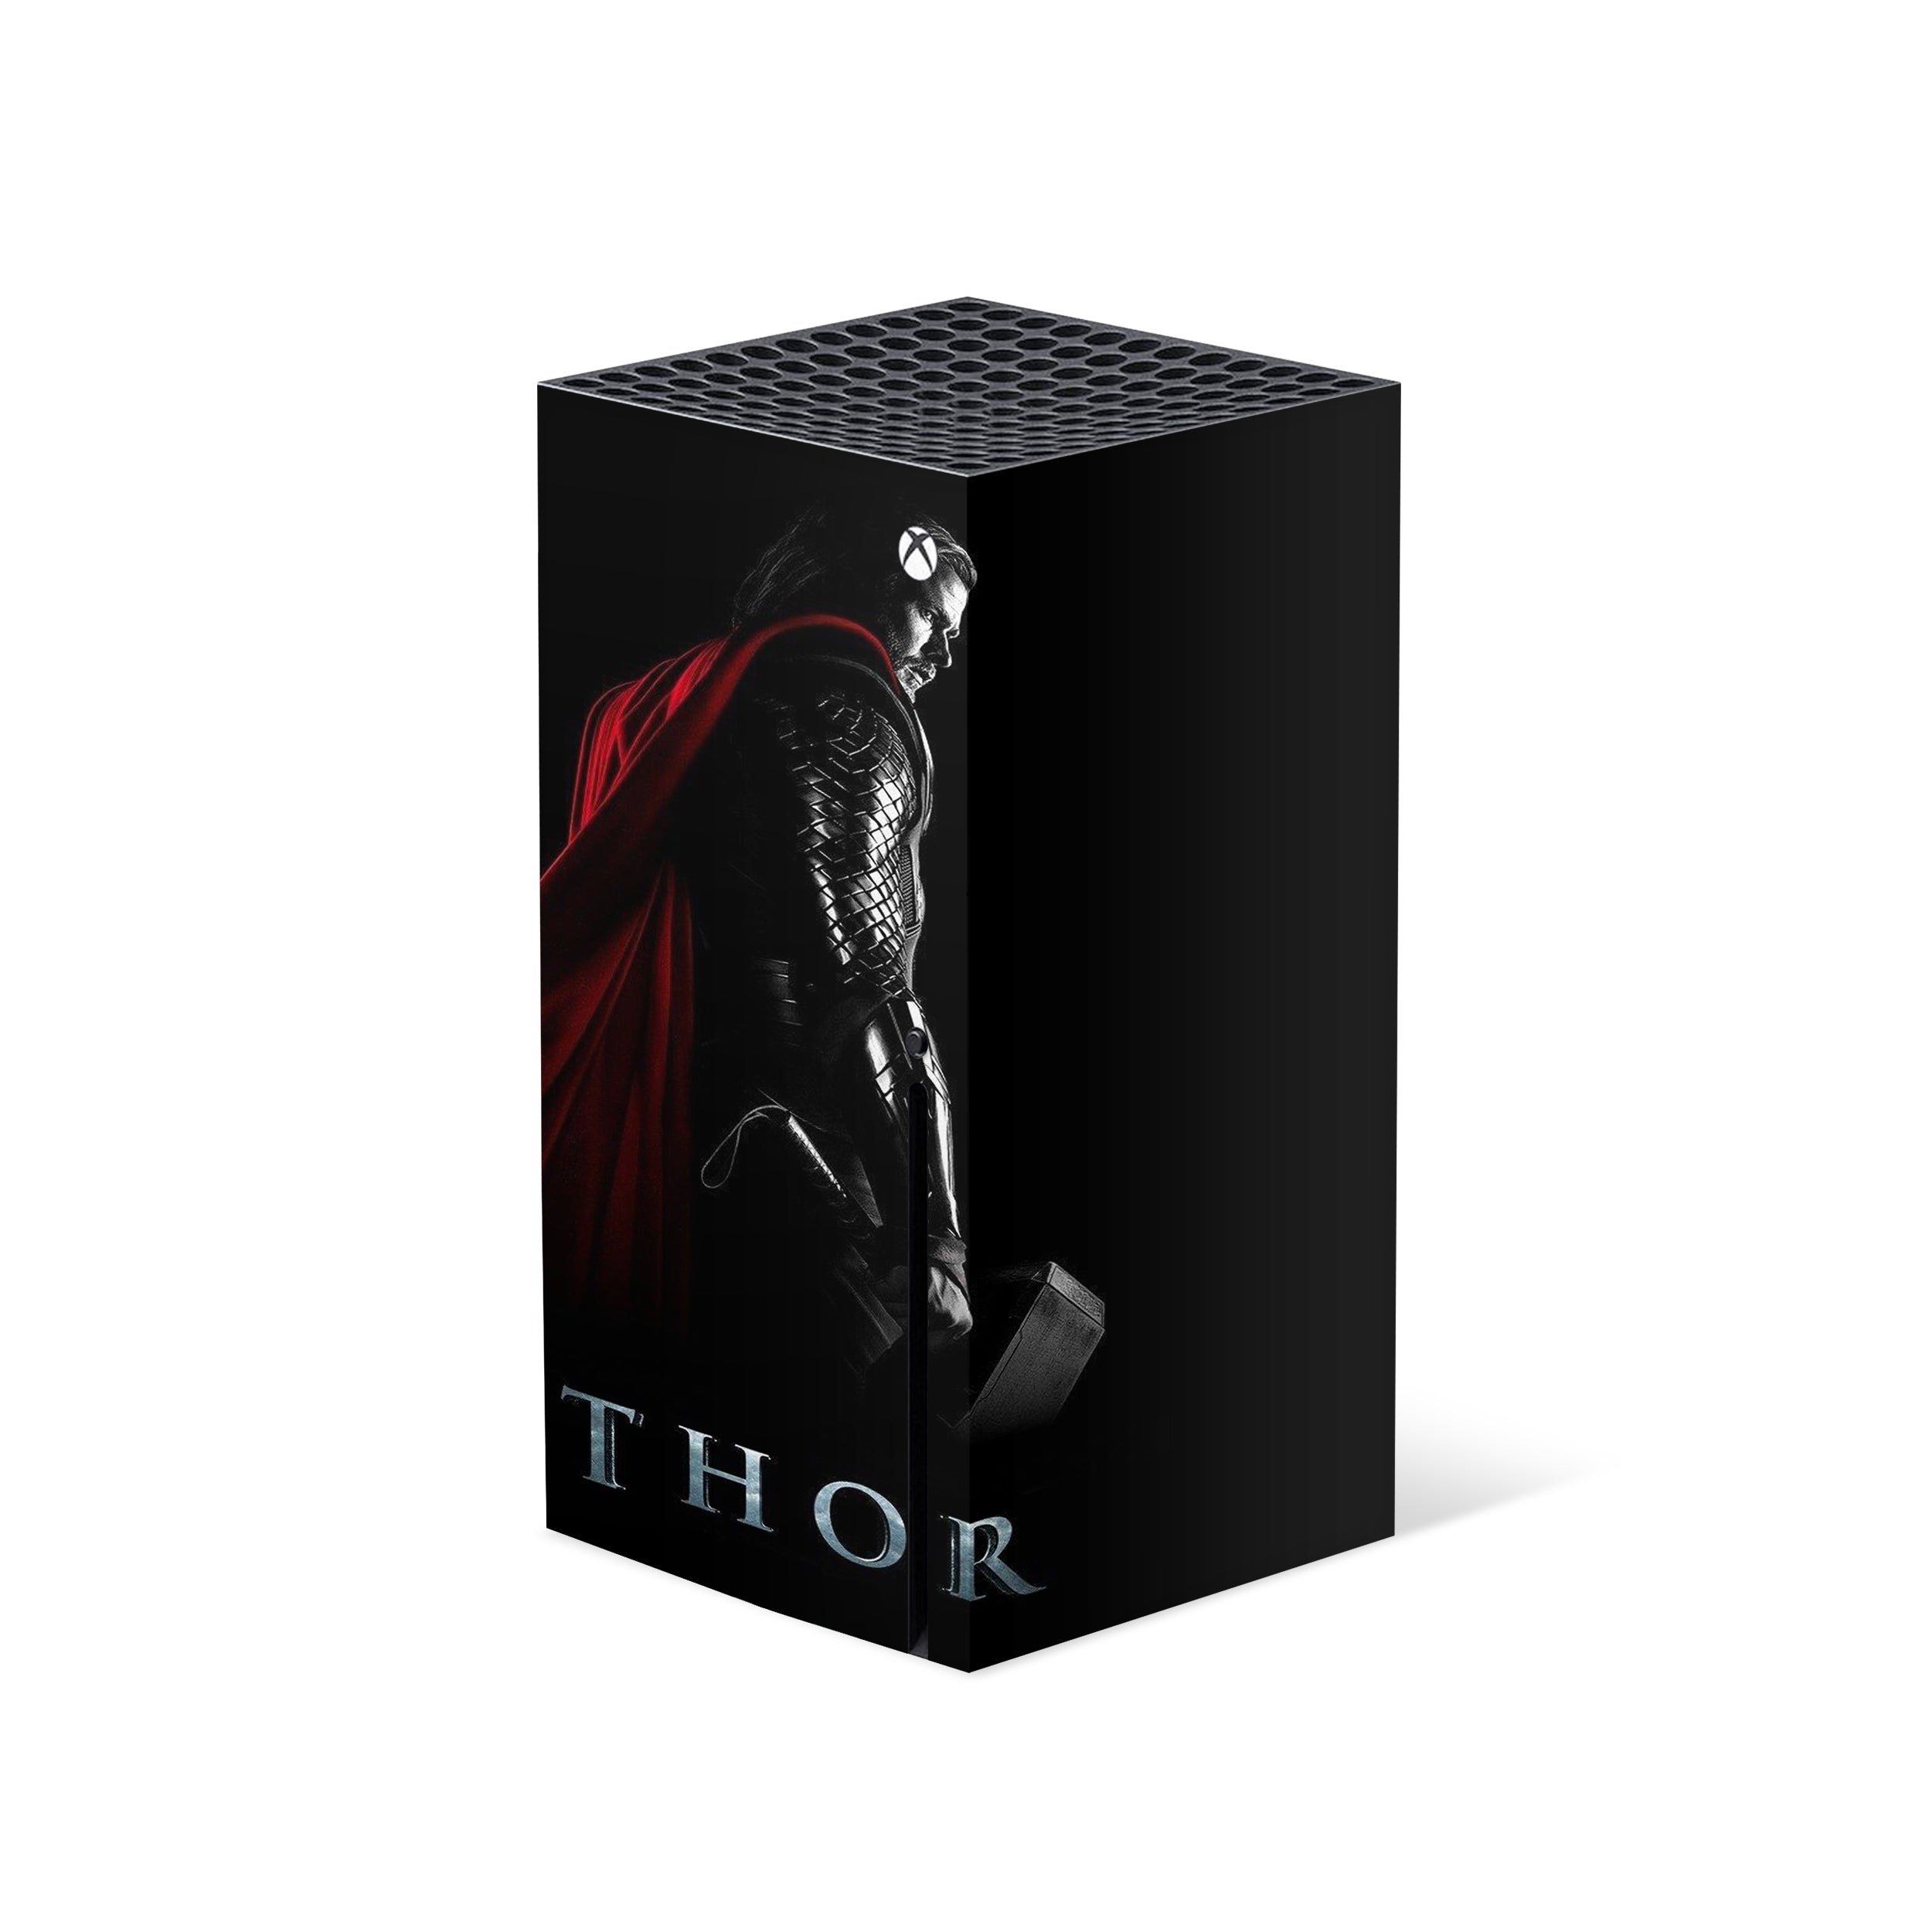 A video game skin featuring a Marvel Thor design for the Xbox Series X.